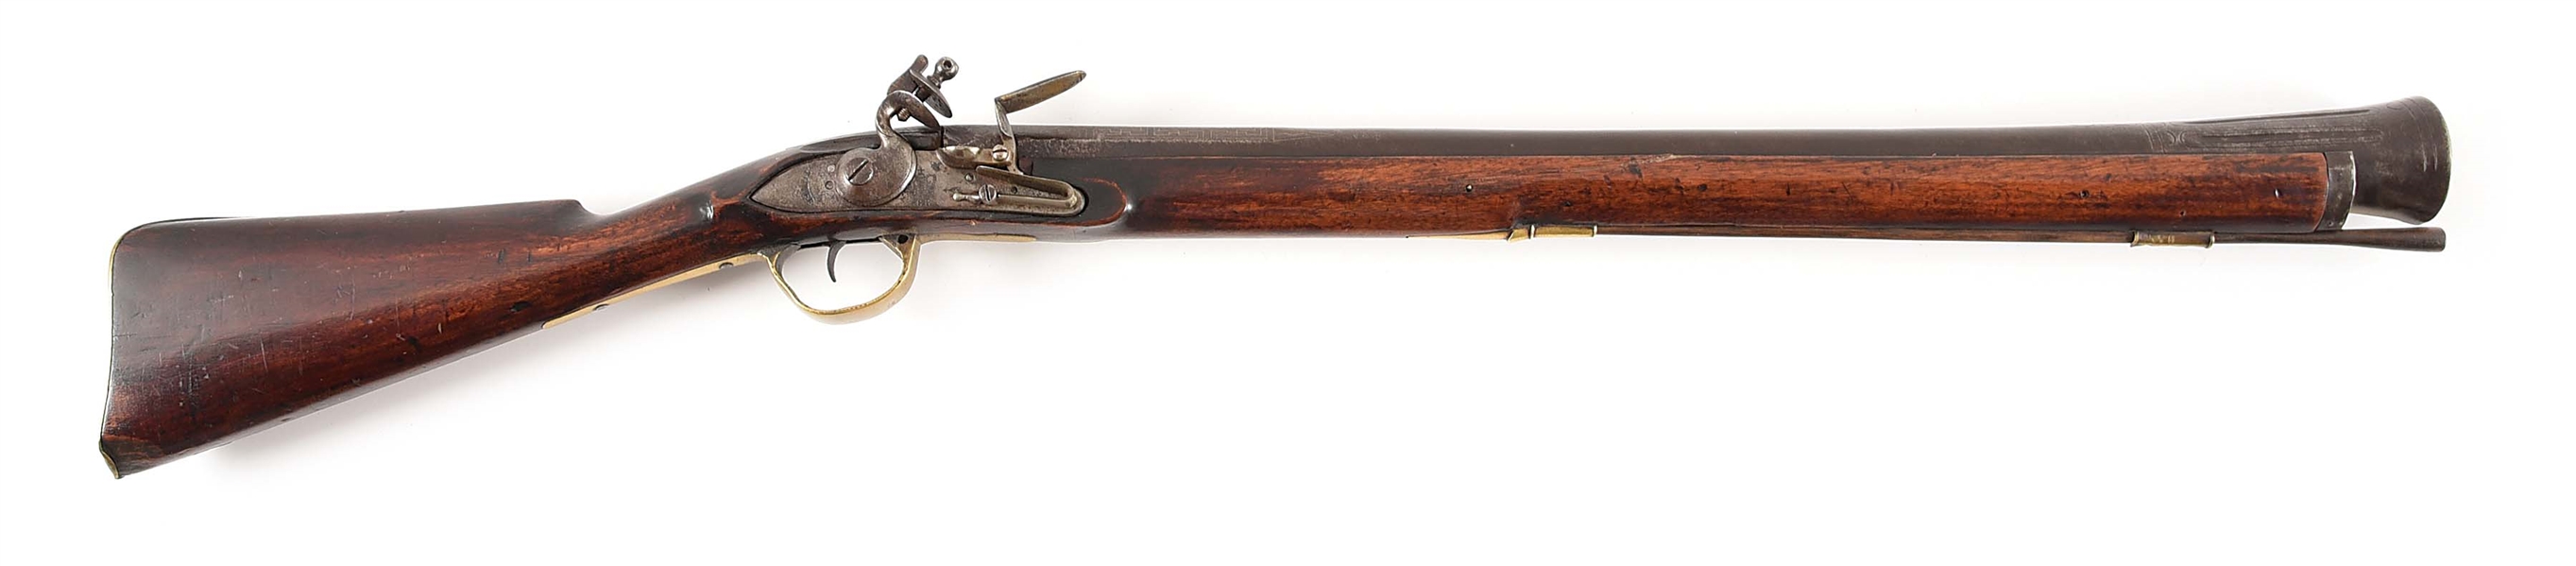 (A) A VERY LONG OTTOMAN BLUNDERBUSS IN THE BRITISH STYLE.